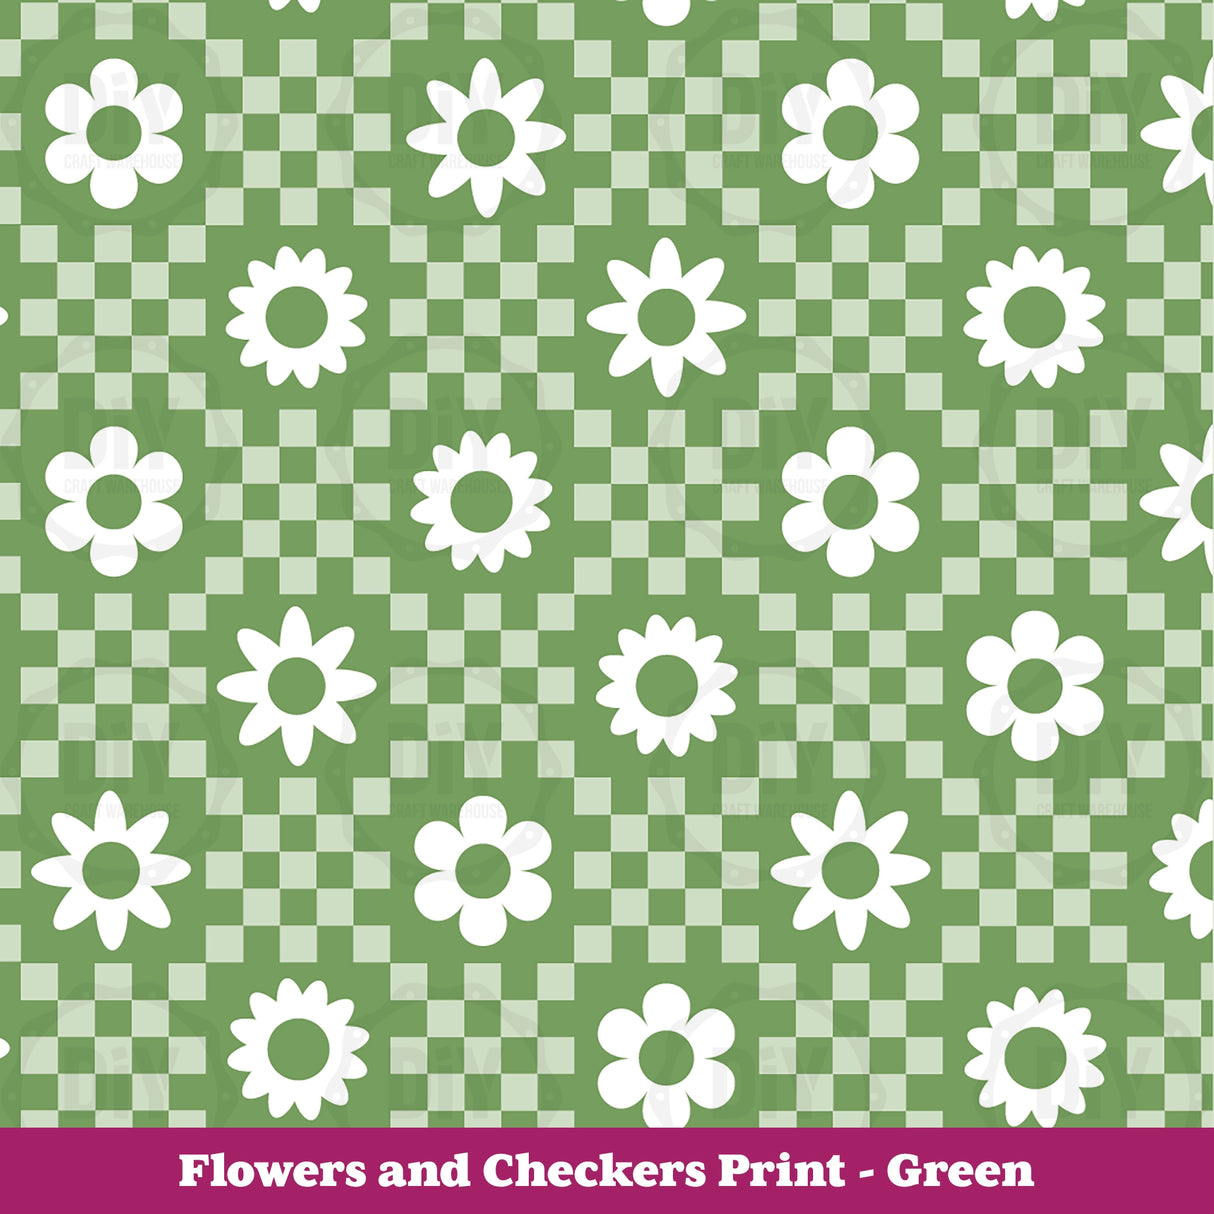 Flowers & Checkers Sublimation Transfer - Green